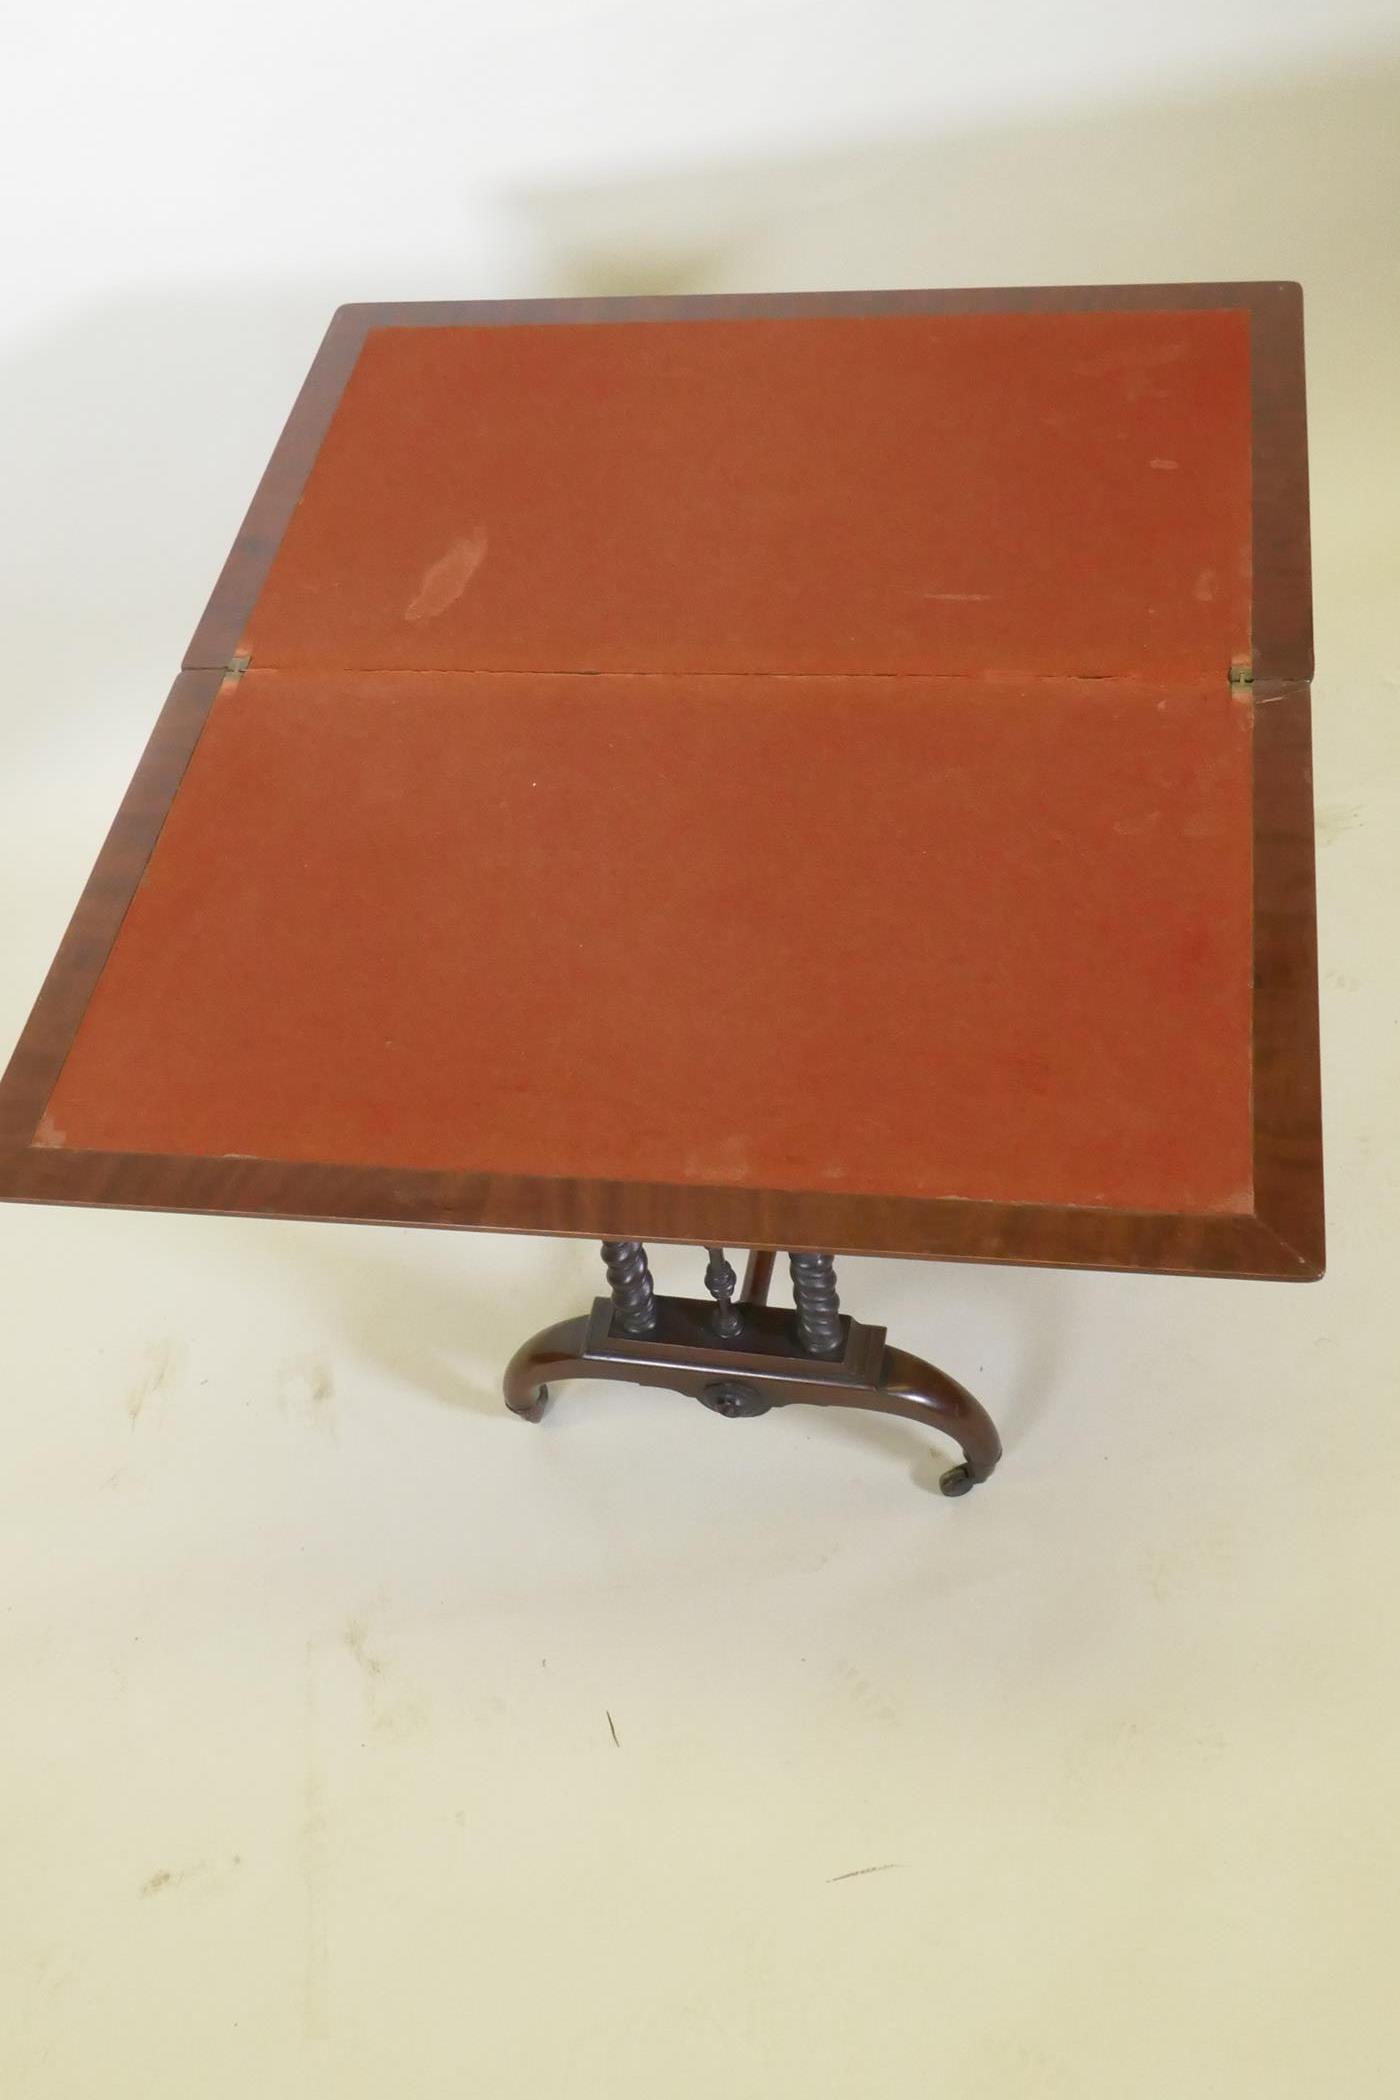 A C19th figured mahogany card table by Lamb of Manchester, with swivel and fold over top, baized - Image 7 of 11